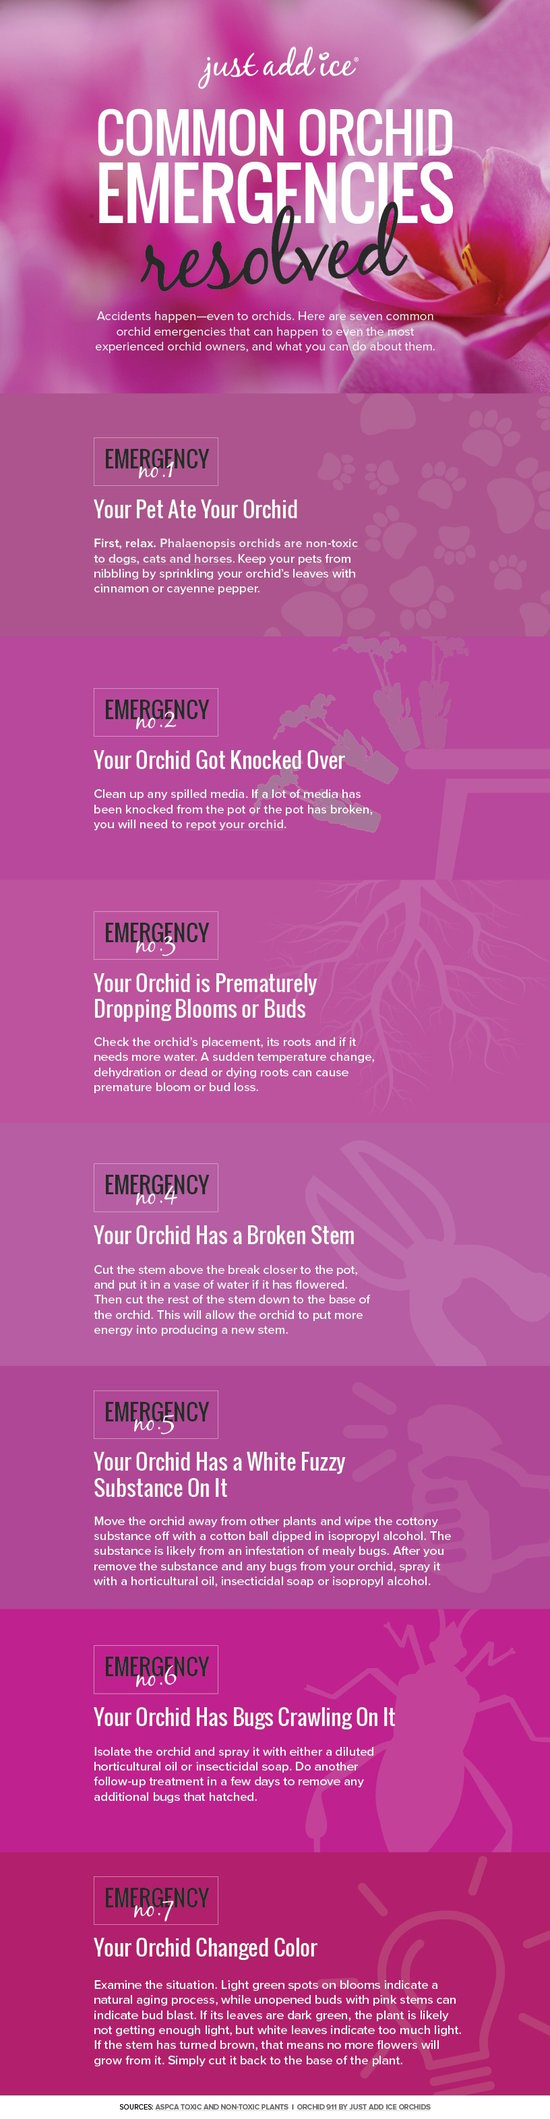 common-orchid-emergencies-resolved-infographic.jpg